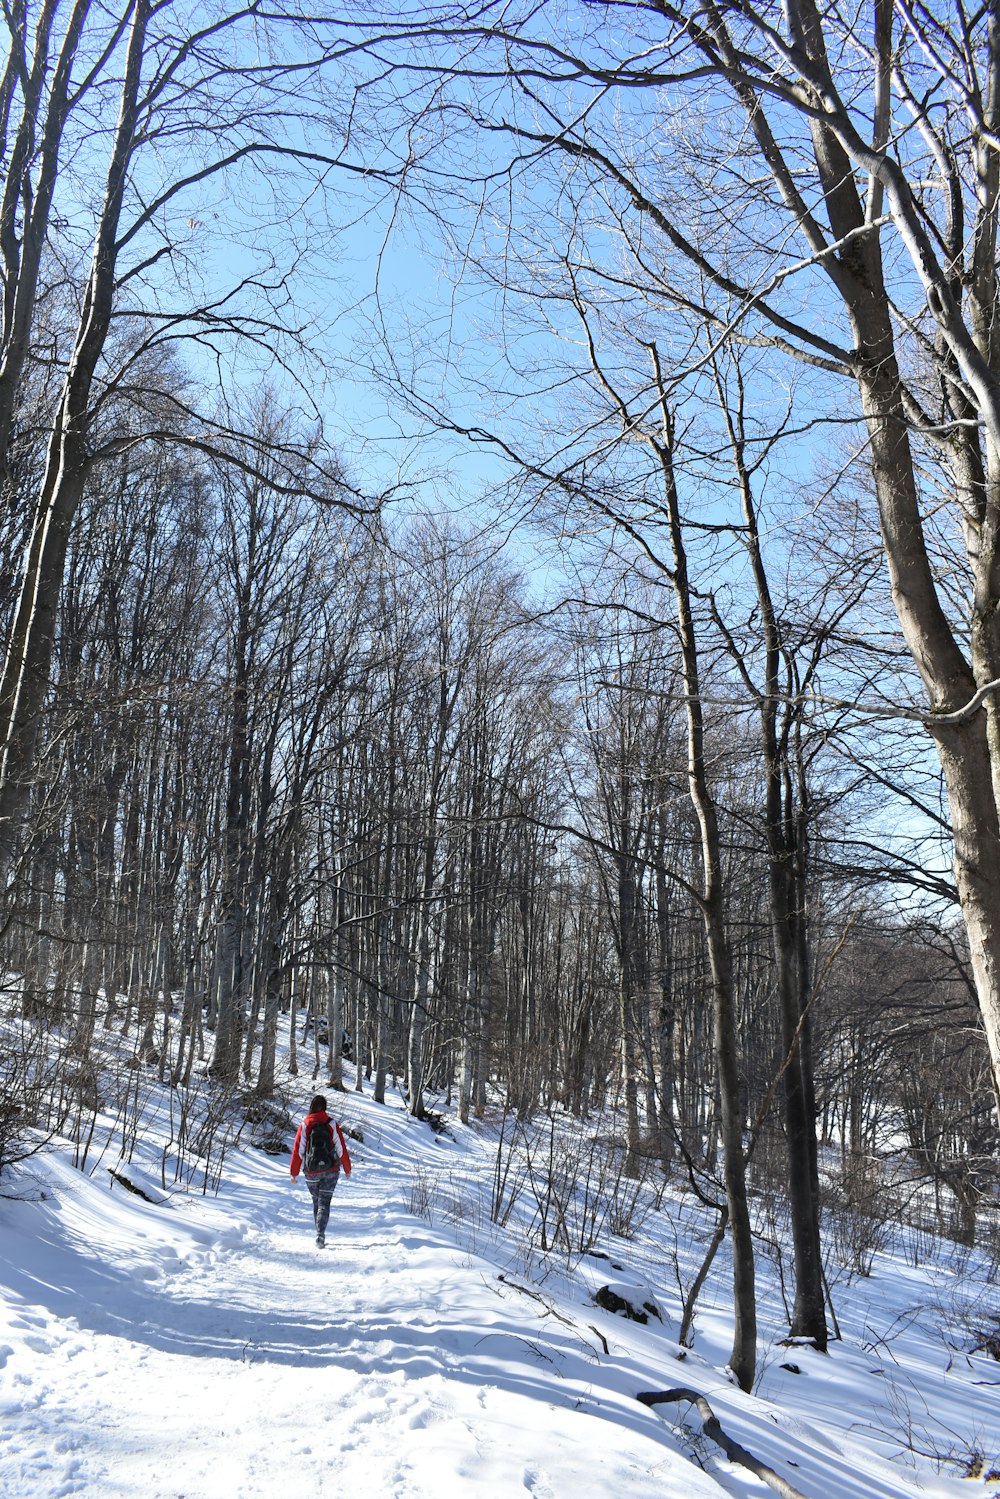 person in red jacket and black pants walking on snow covered ground near bare trees during